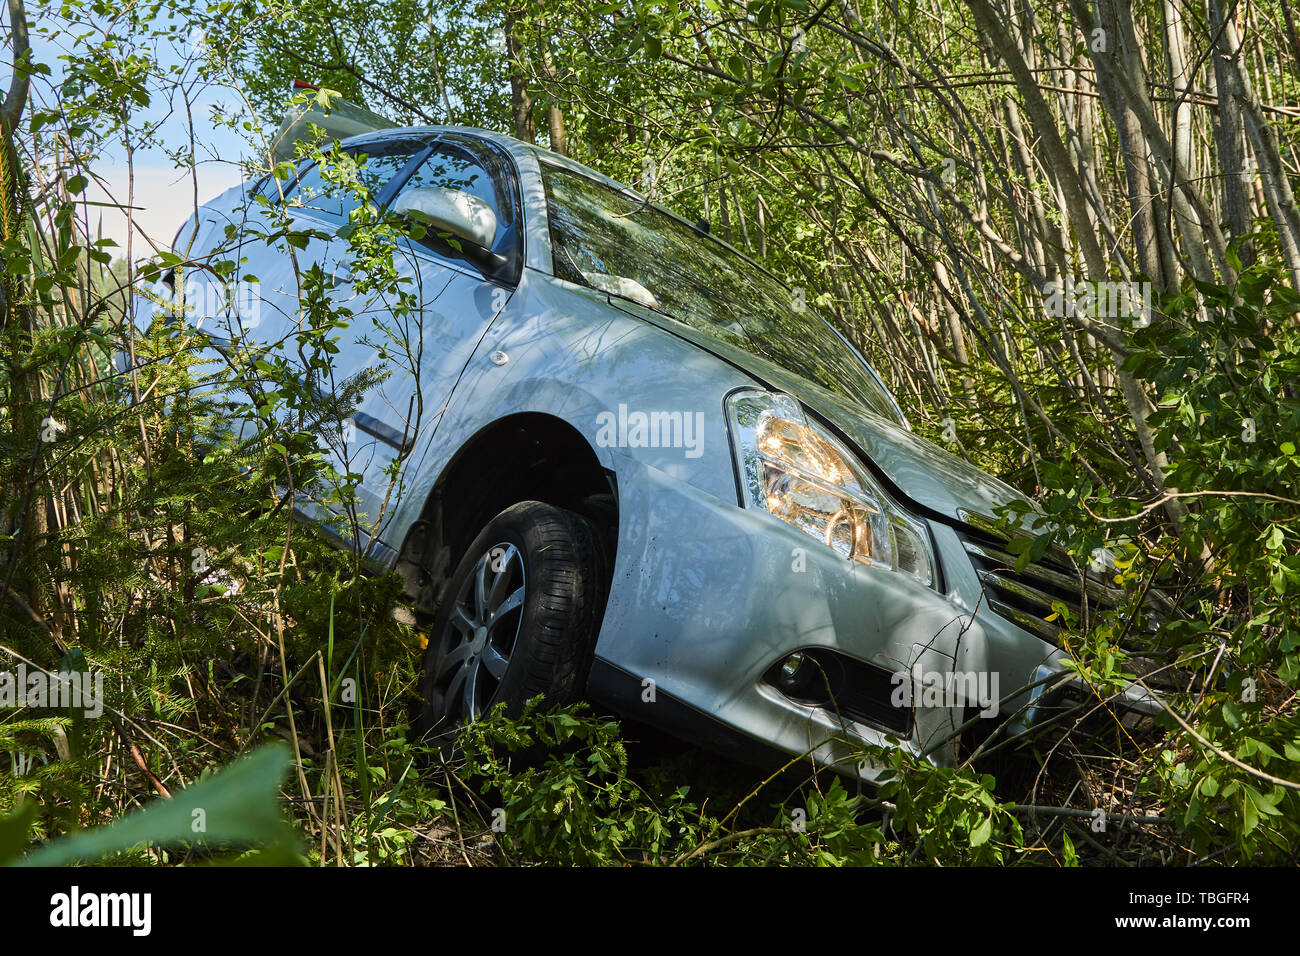 Car accident on a road in May 20, 2019 car after a frontal collision in Latvia next to Ozolnieki, transportation background Stock Photo